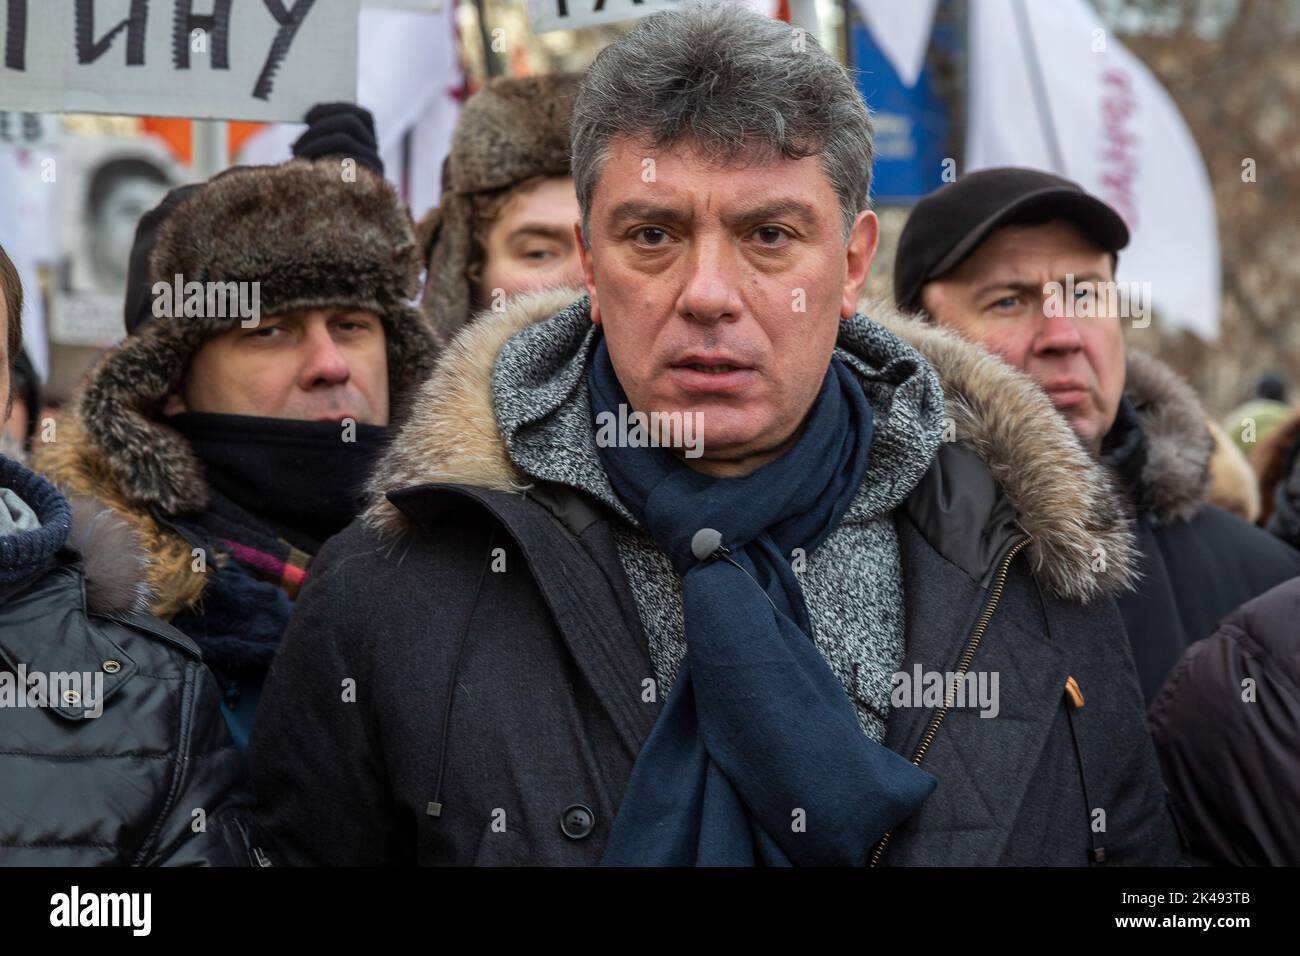 Moscow, Russia. 2nd of February, 2014 The leader of the movement 'Solidarity' Boris Nemtsov (in center) during opposition rally at the center of Moscow, Russia Stock Photo